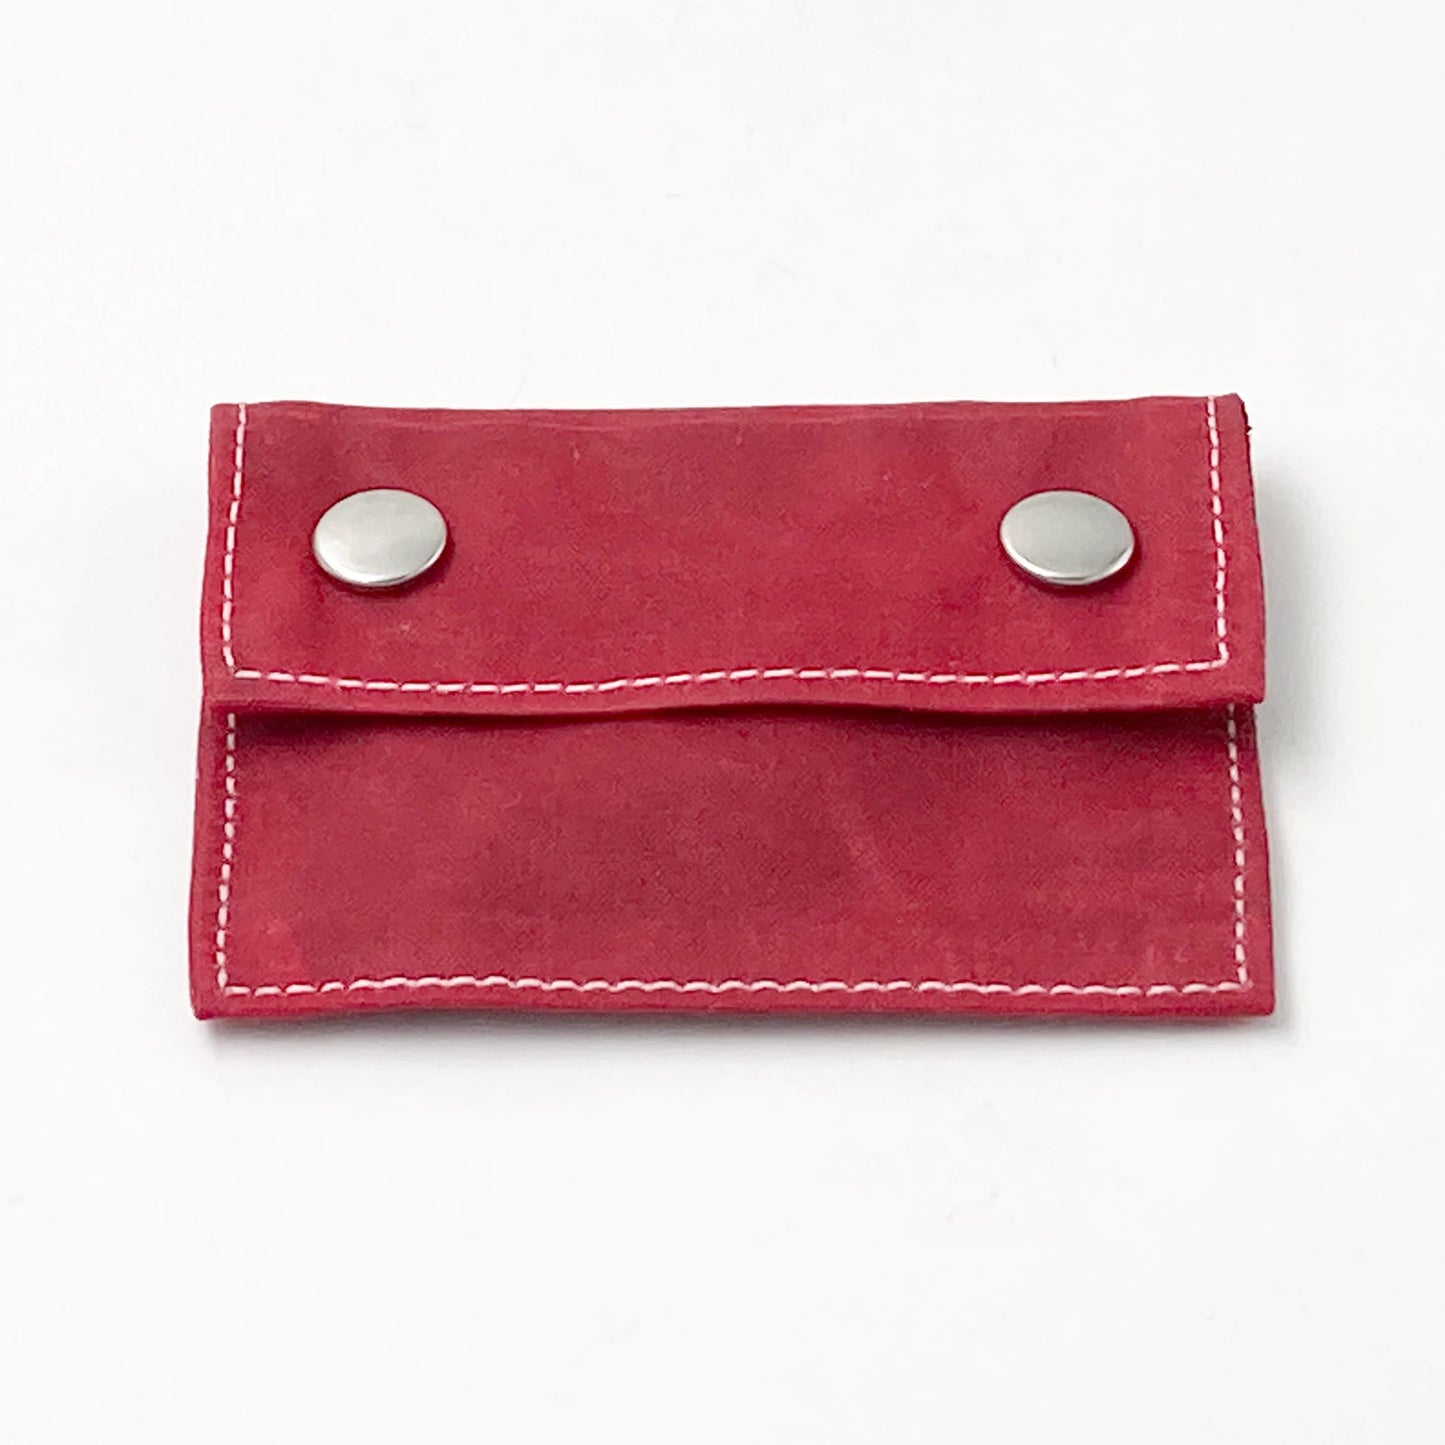 purse - traditional oilskin red